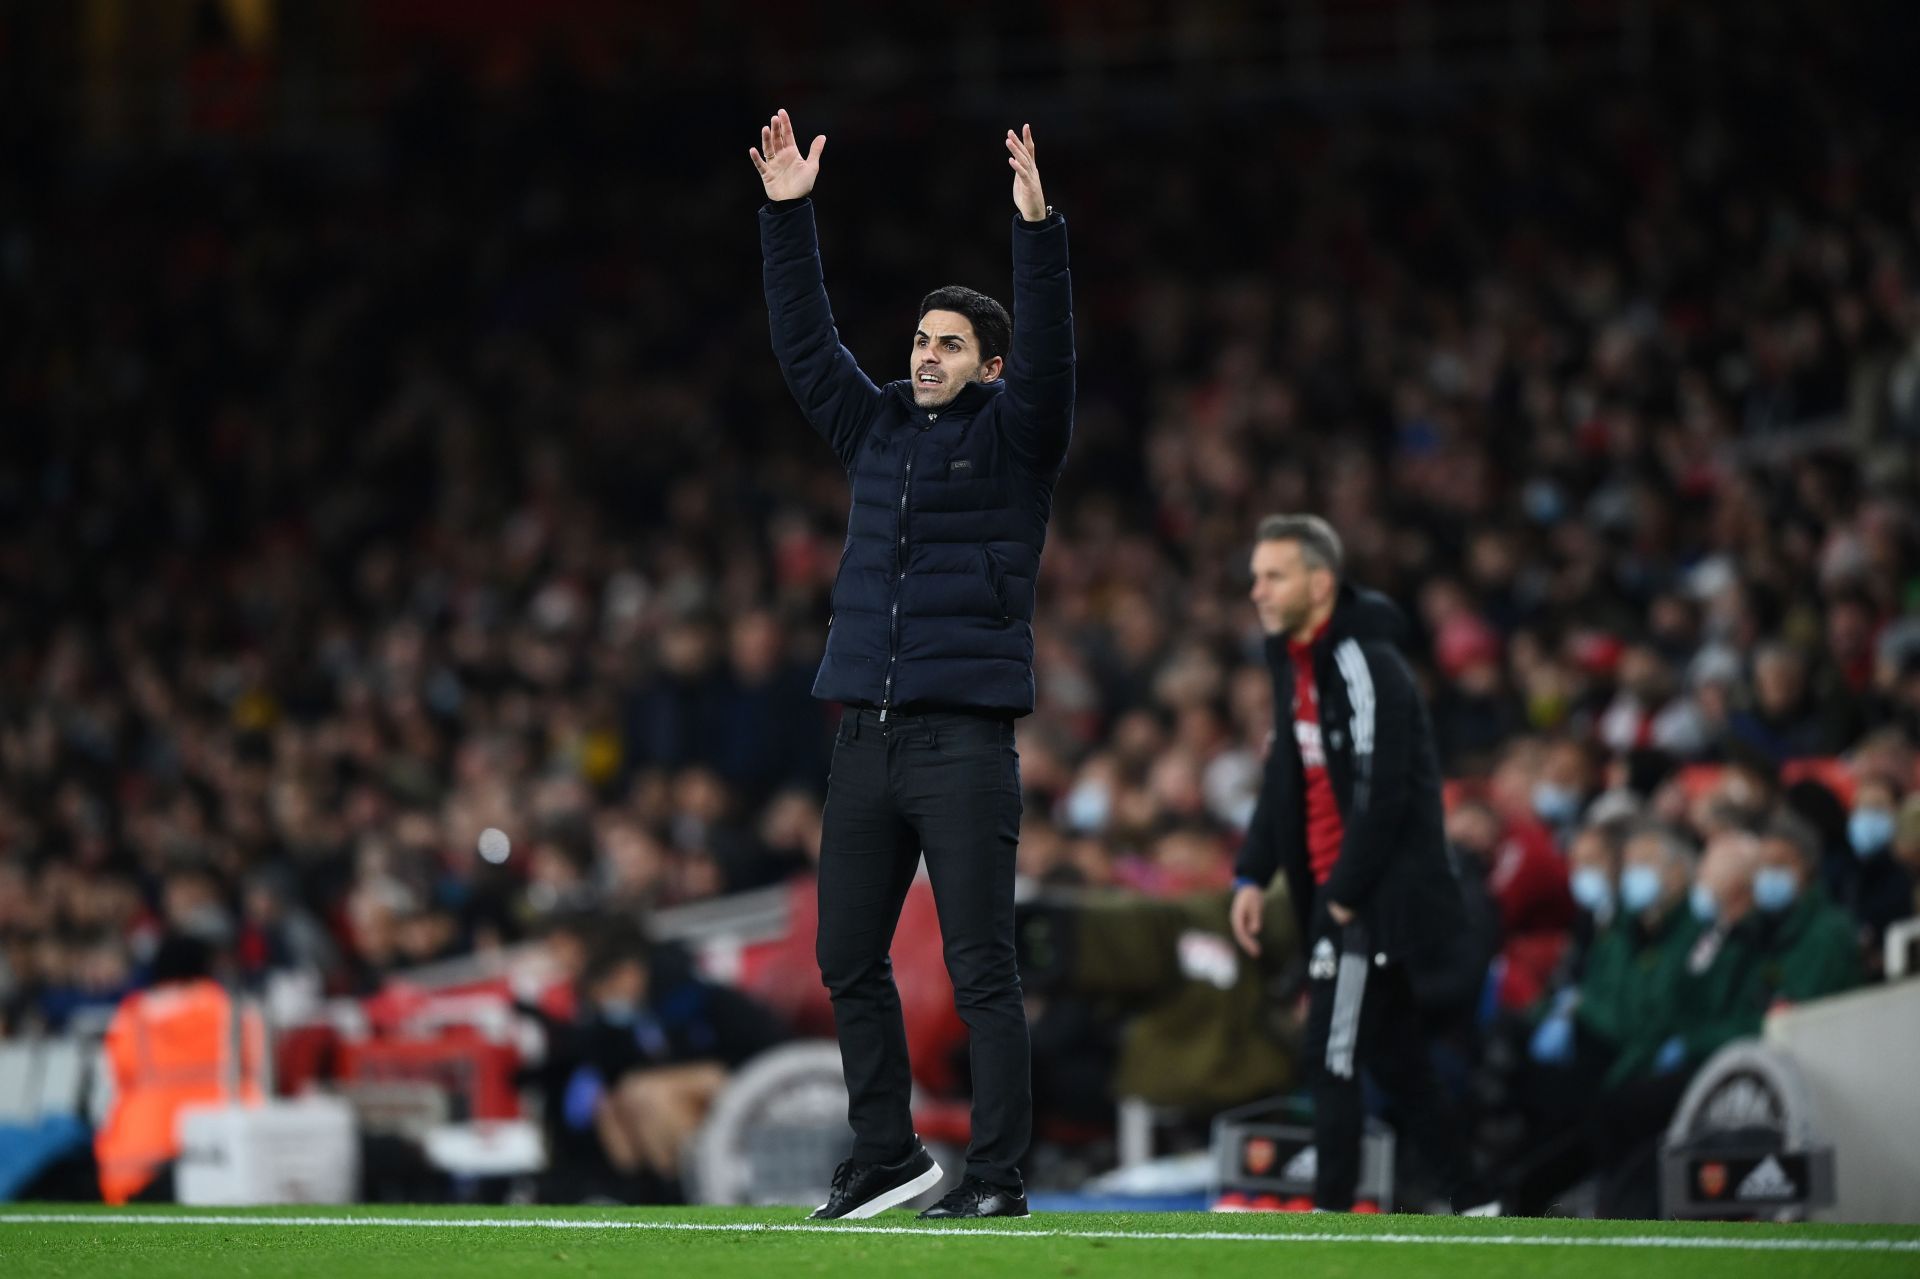 Arsenal manager Mikel Arteta got the better of West Ham United on Wednesday.